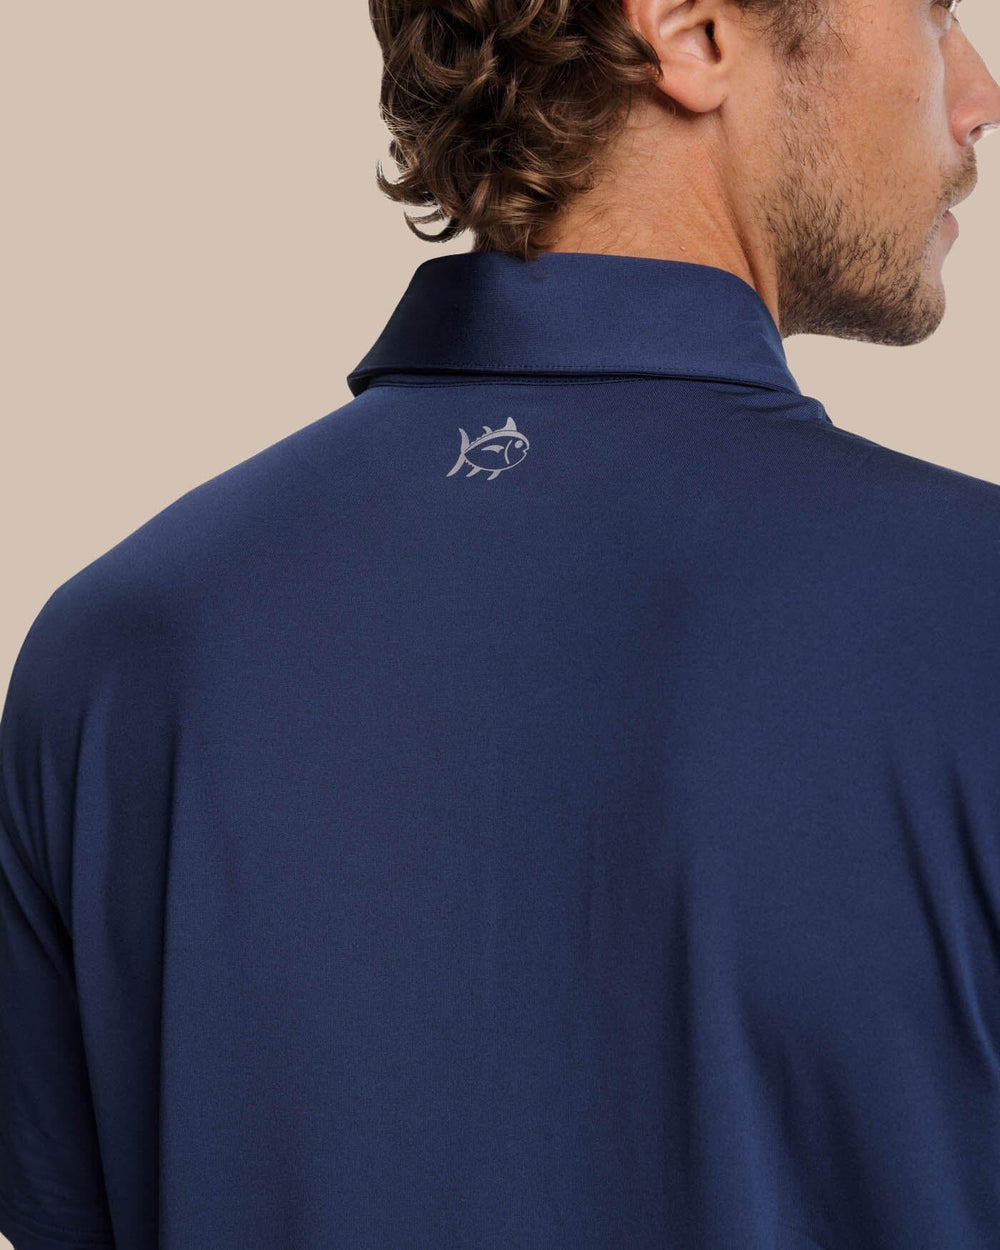 The detail view of the Southern Tide Brenton Chest Stripe Performance Polo by Southern Tide - Navy